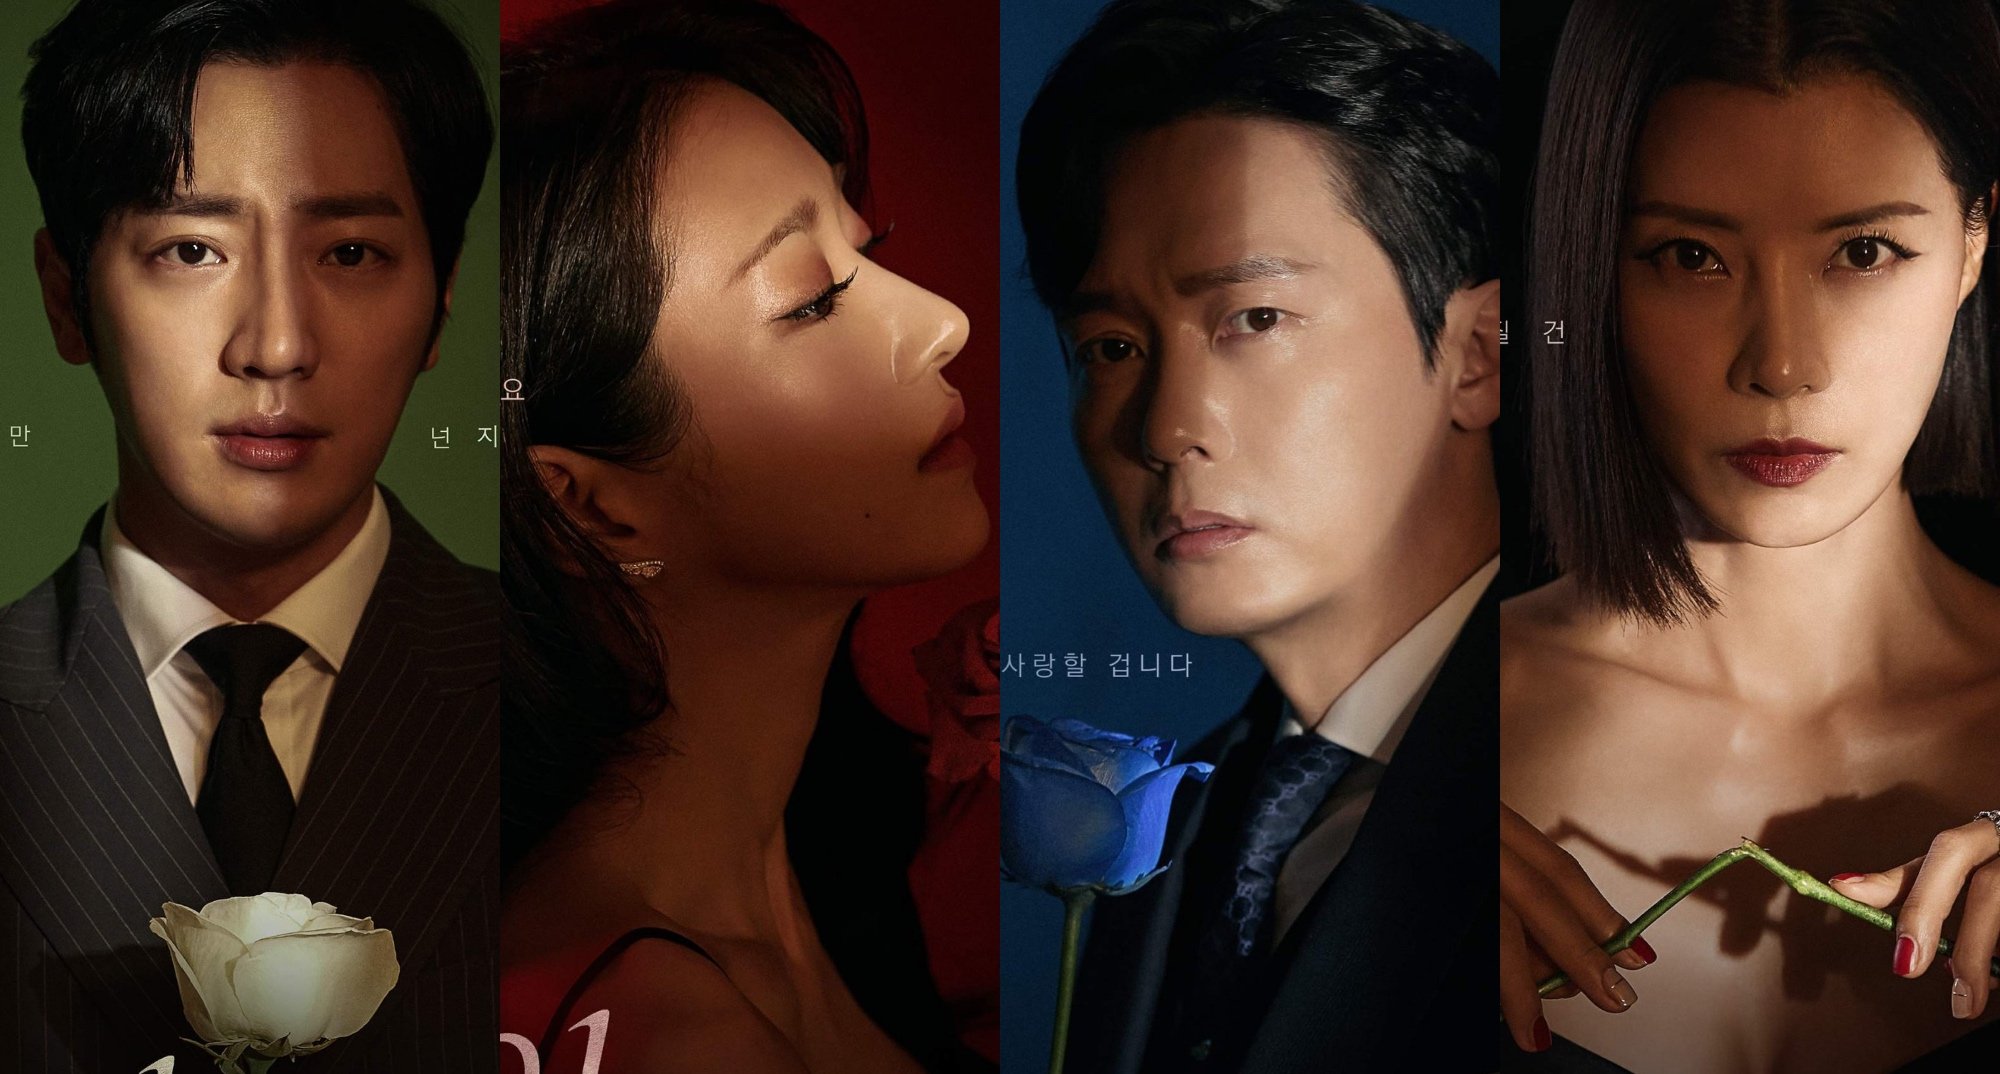 Main characters in 'Eve' K-drama posters holding roses.